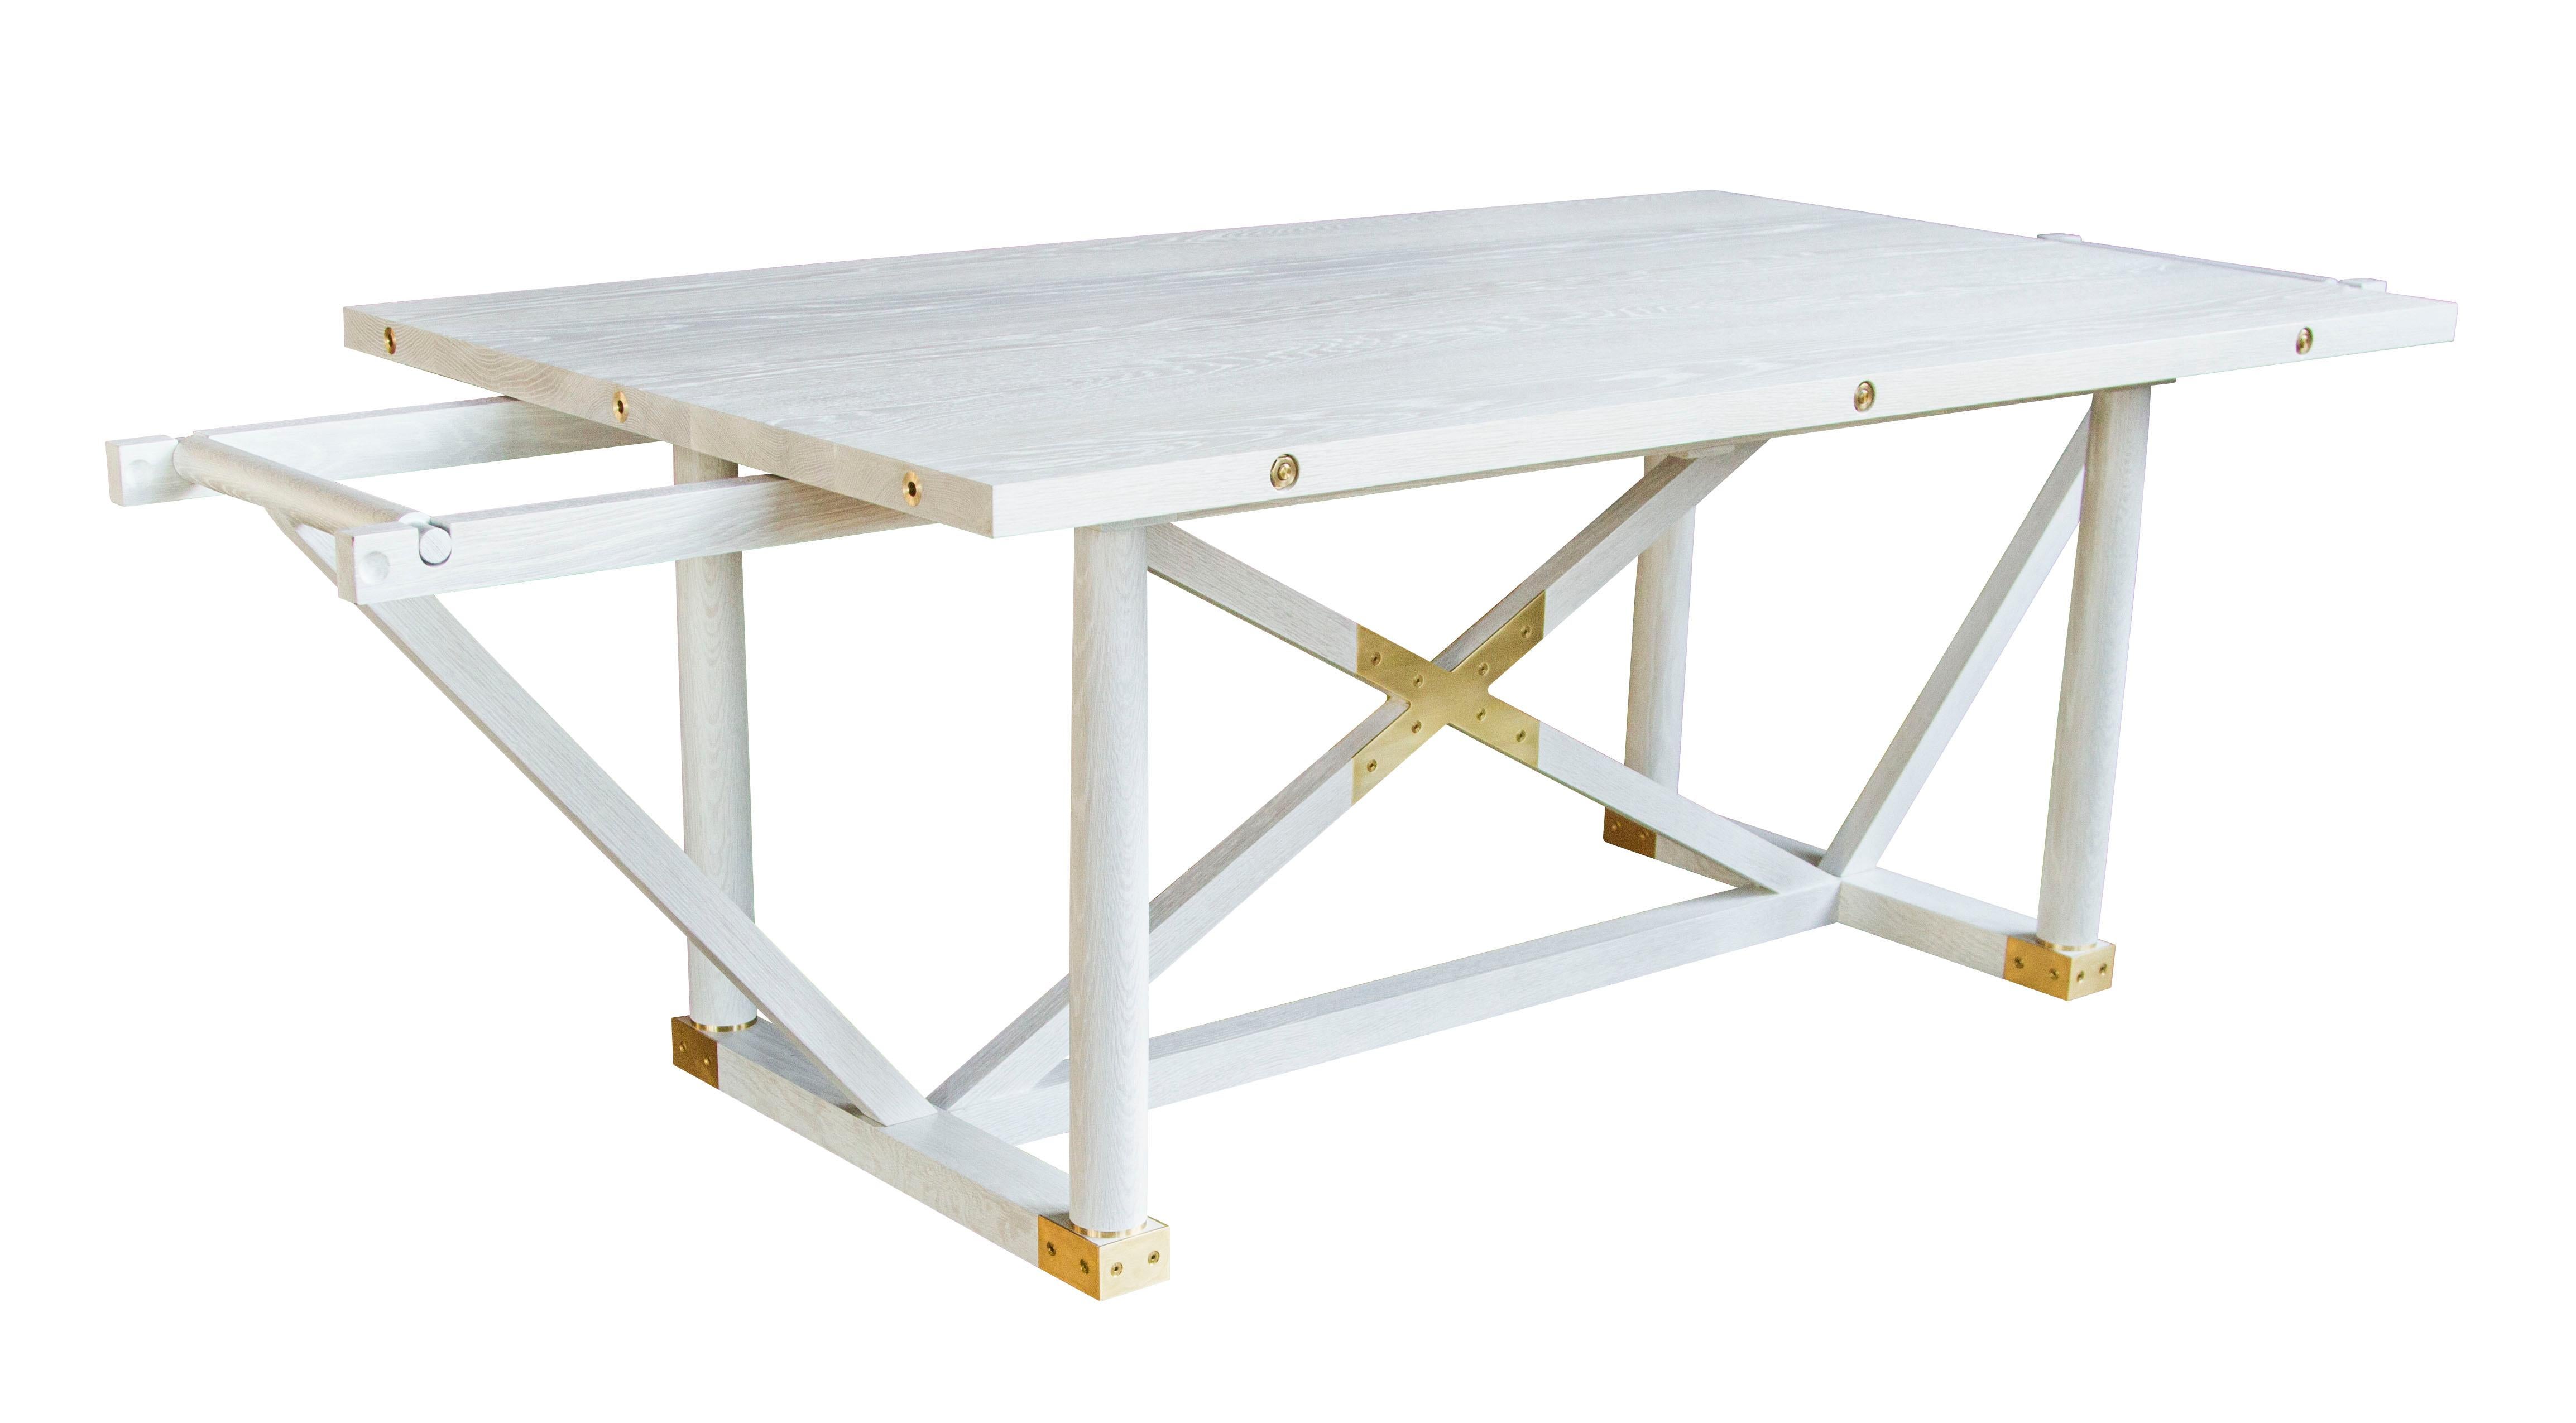 Hand-Crafted Carden Table in Bleached White Oak- handcrafted by Richard Wrightman Design